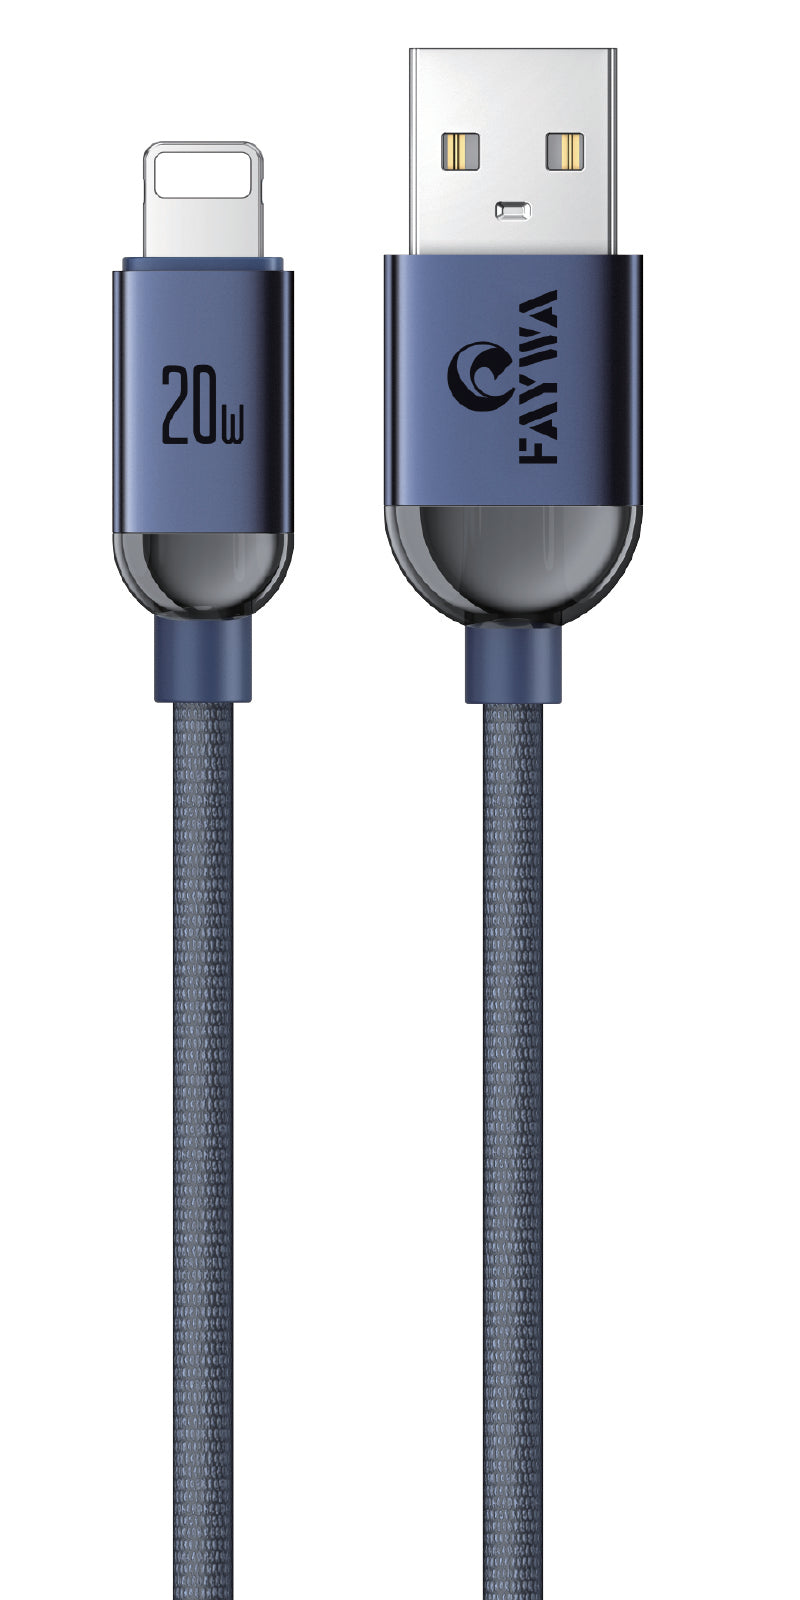 SUPREME 1 (Fast Charge iPhone Data Cable) 2.4A - My Store